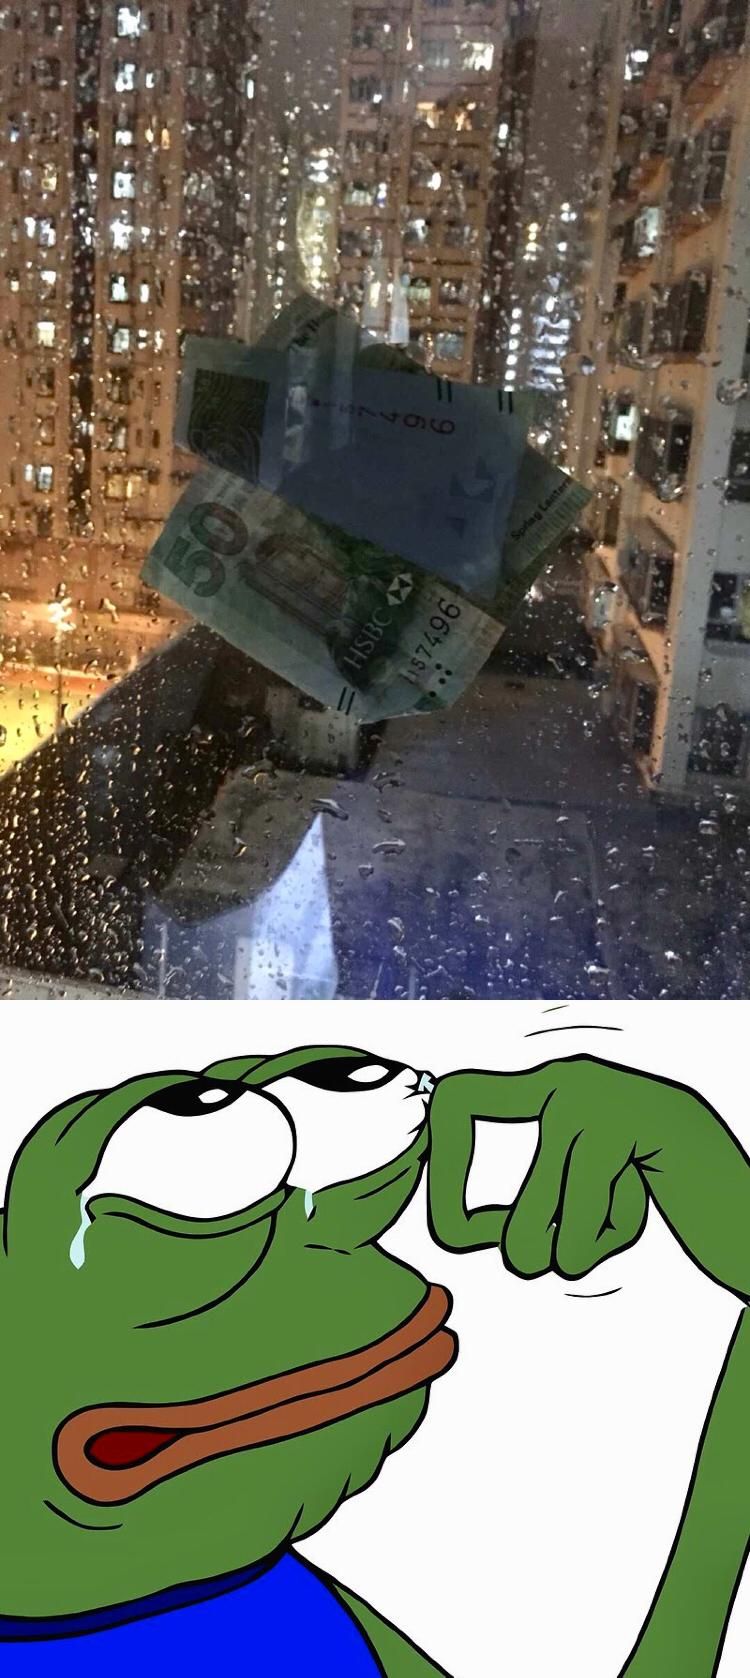 When typhoon blew a 50 HK dollar right onto my window, but I couldn't open the window to get it